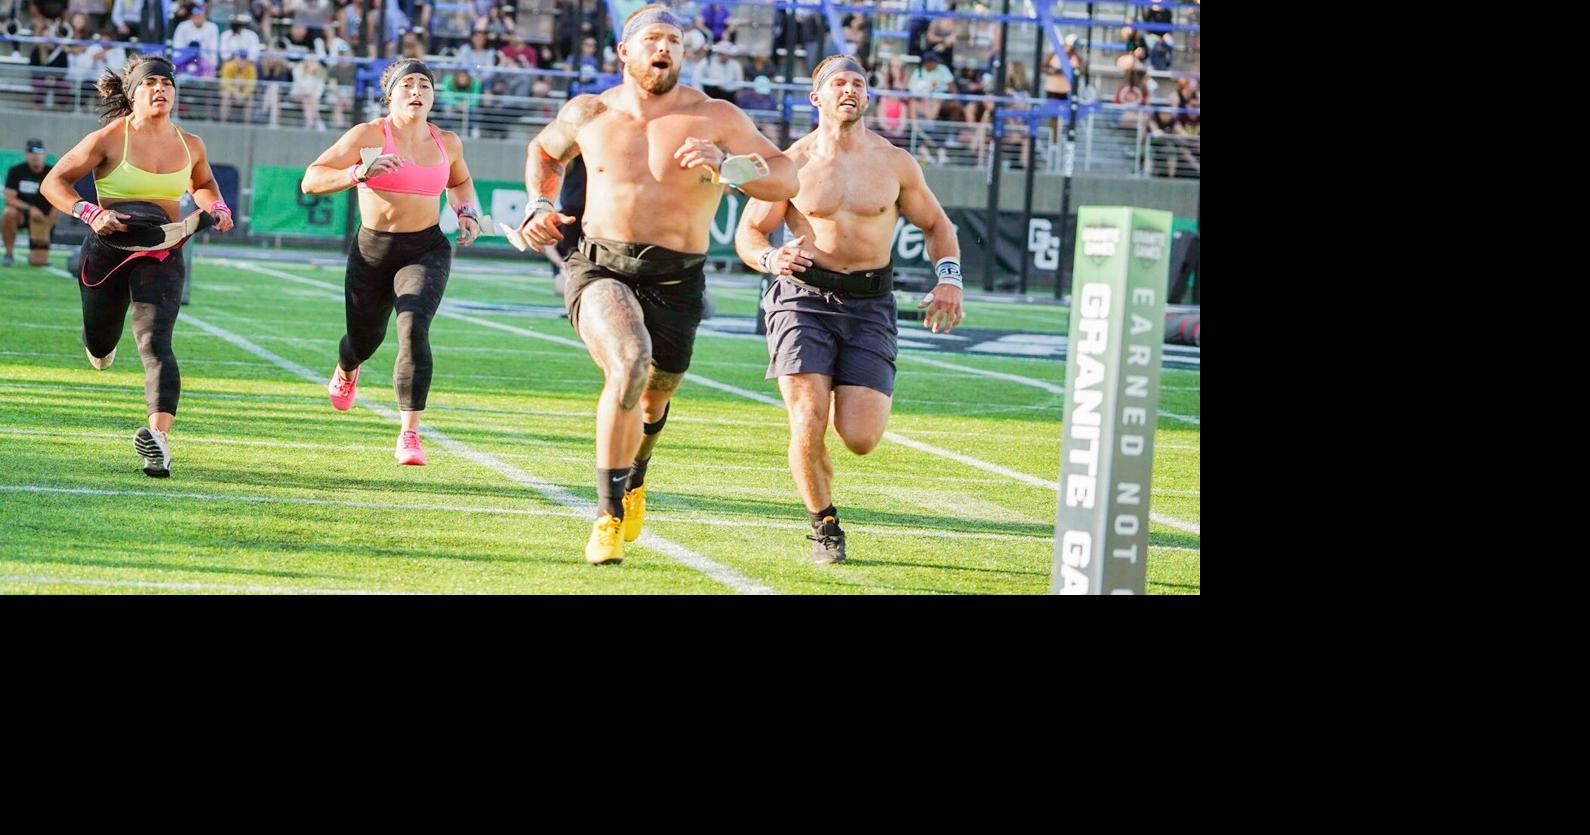 Charleston's Team Rhapsody headed for the Crossfit Games